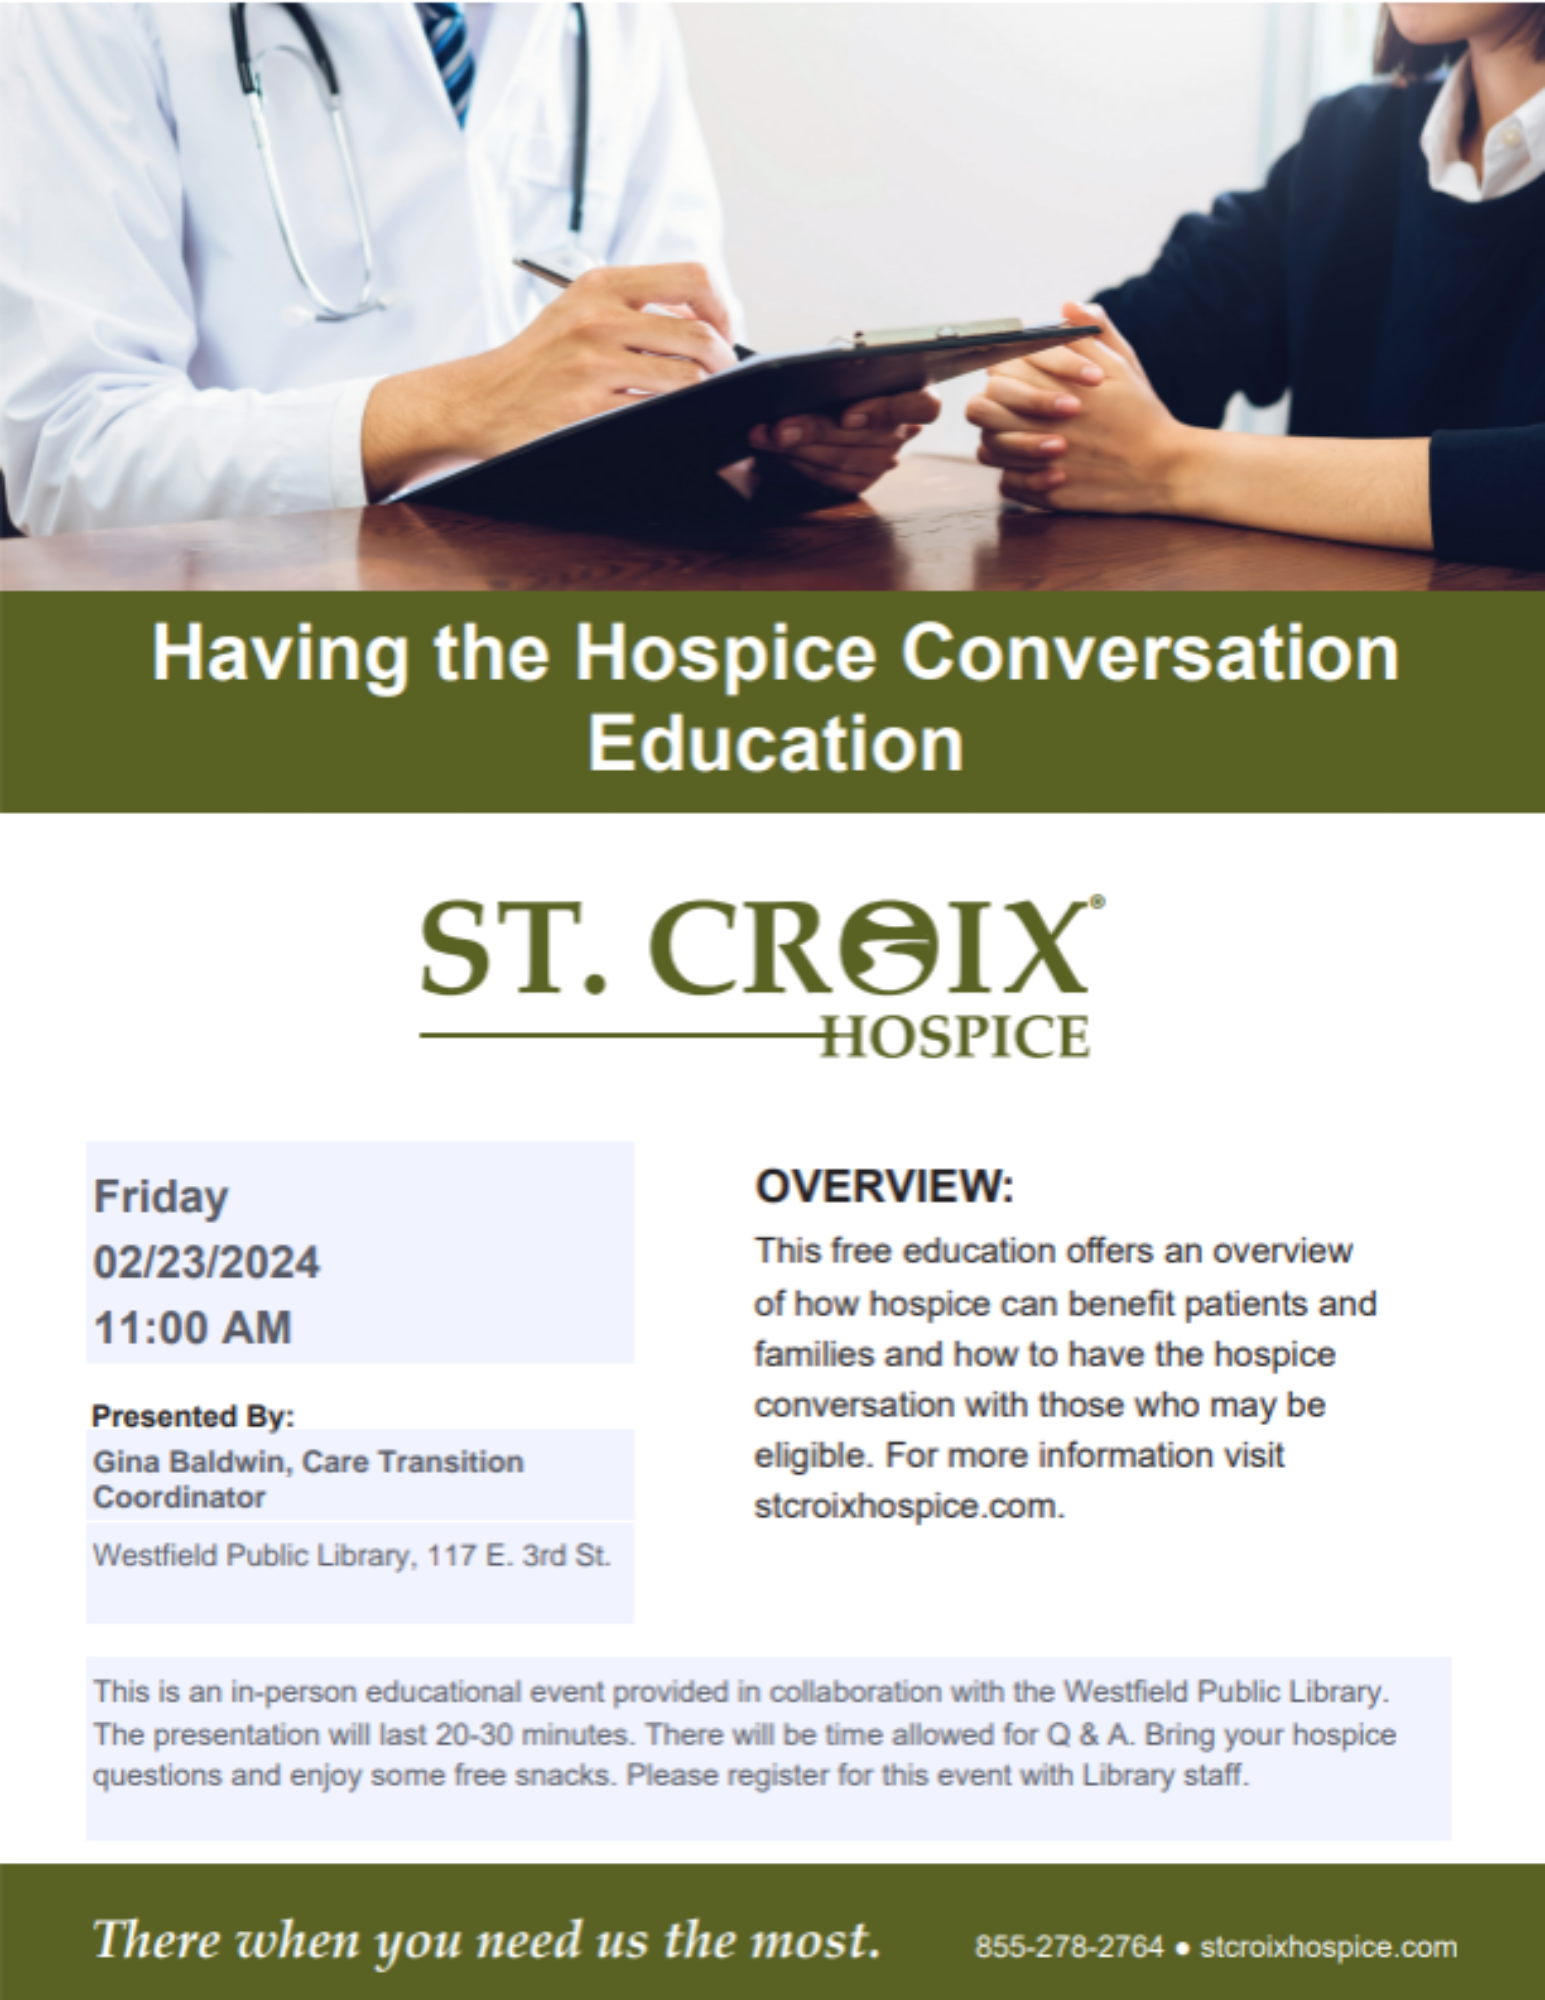 Having the Hospice Conversation with St. Croix Hospice